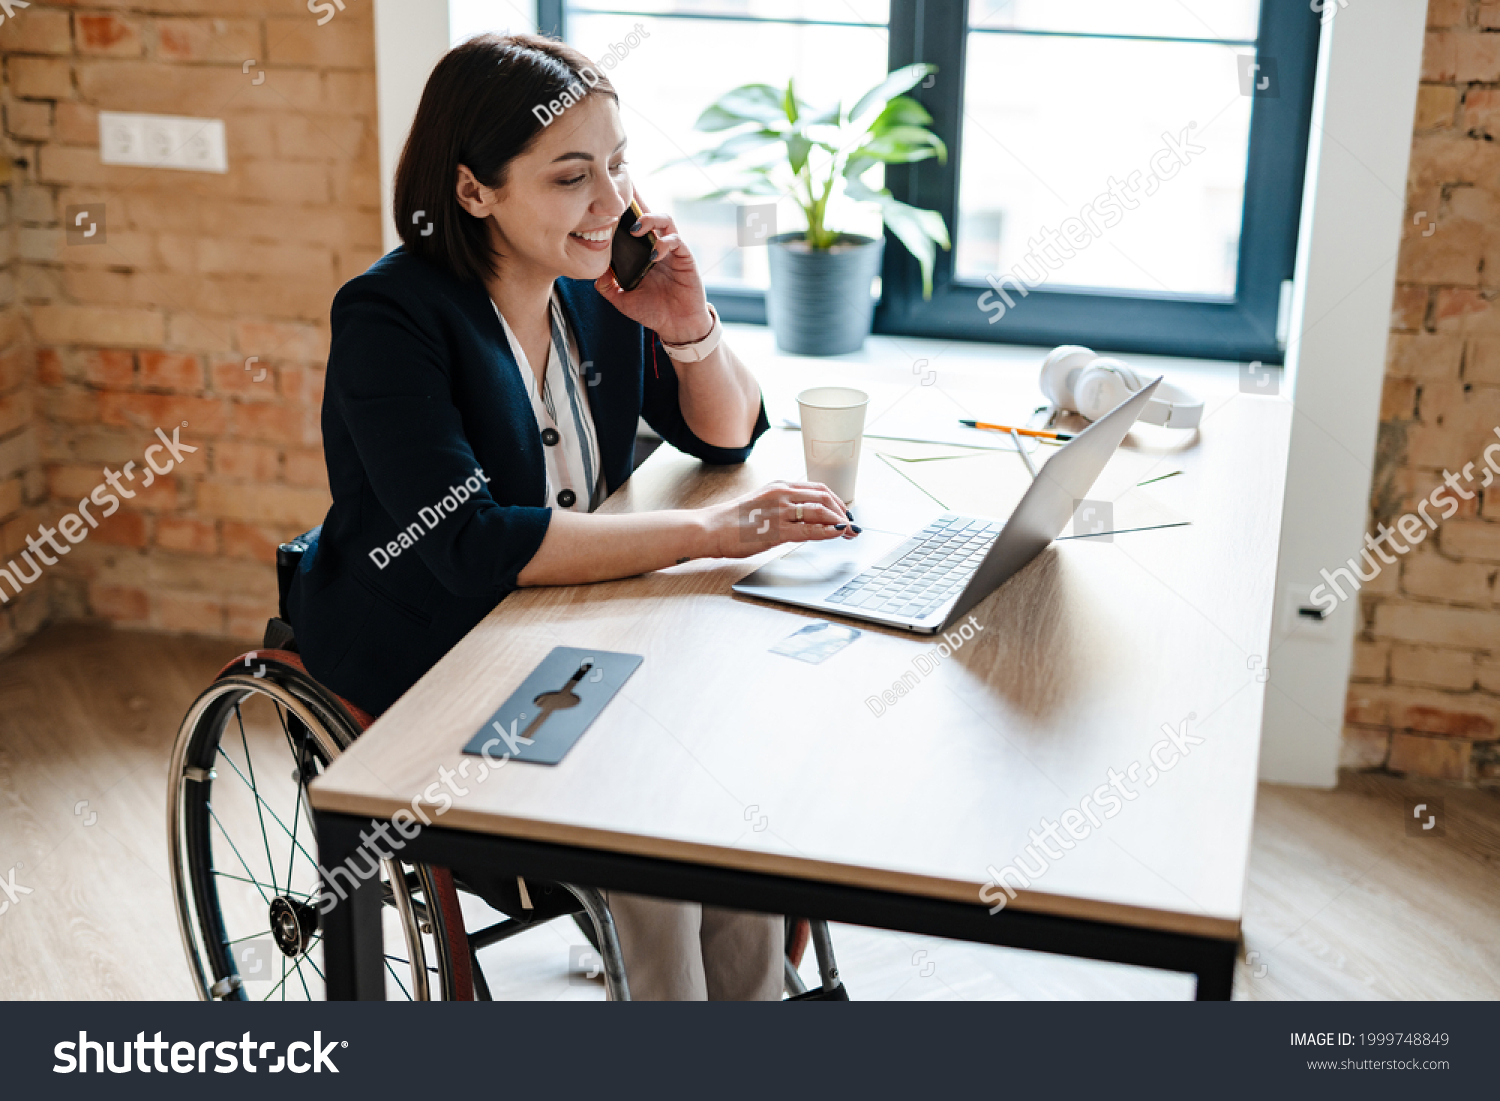 Young disabled business woman in wheelchair working at office desk and with laptop, talking on mobile phone accessibility and independence concept #1999748849